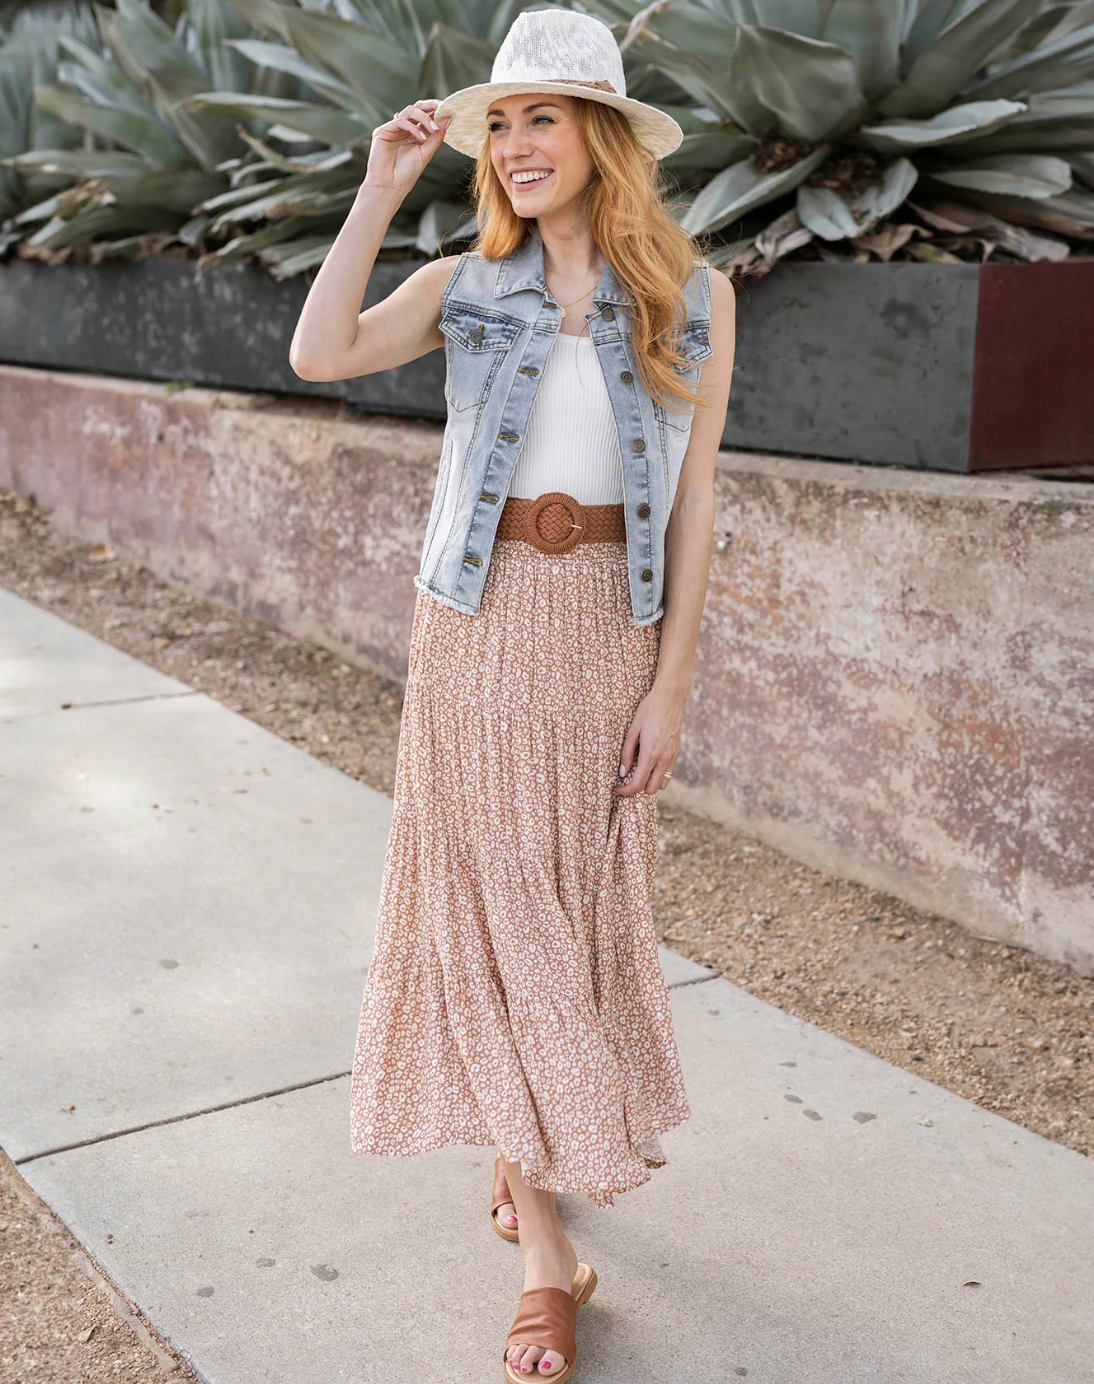 Grace & Lace Go-To Tiered Skirt in Neutral Mini Cheetah